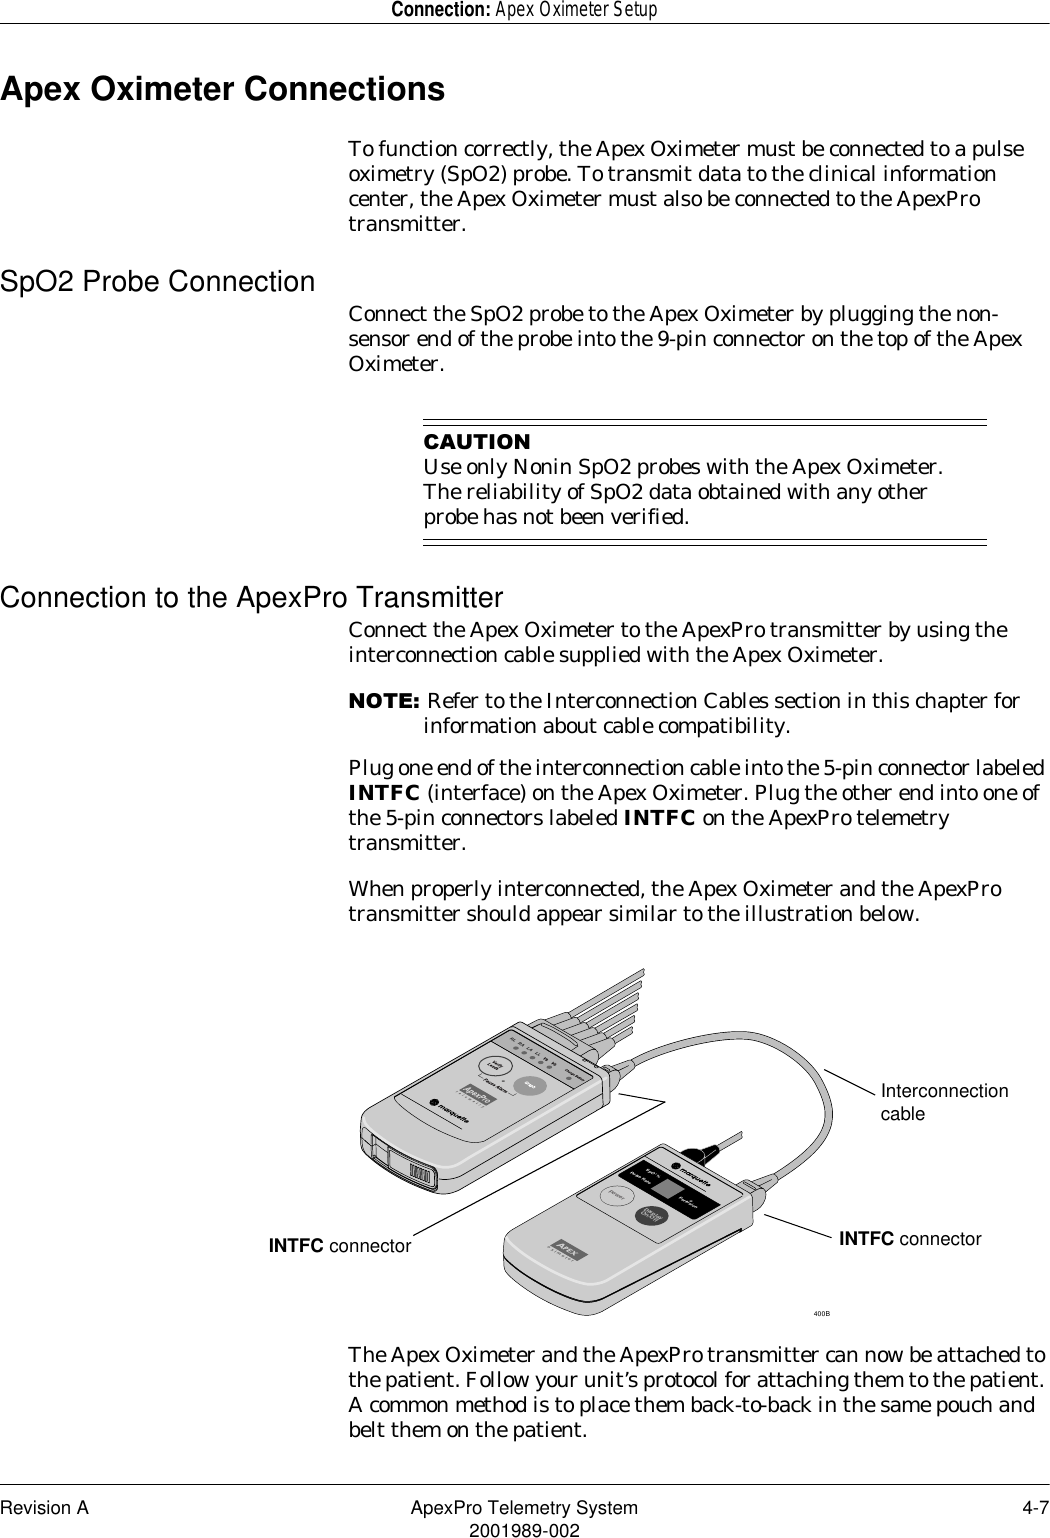 Revision A ApexPro Telemetry System 4-72001989-002Connection: Apex Oximeter SetupApex Oximeter ConnectionsTo function correctly, the Apex Oximeter must be connected to a pulse oximetry (SpO2) probe. To transmit data to the clinical information center, the Apex Oximeter must also be connected to the ApexPro transmitter.SpO2 Probe Connection Connect the SpO2 probe to the Apex Oximeter by plugging the non-sensor end of the probe into the 9-pin connector on the top of the Apex Oximeter.&amp;$87,21Use only Nonin SpO2 probes with the Apex Oximeter. The reliability of SpO2 data obtained with any other probe has not been verified.Connection to the ApexPro TransmitterConnect the Apex Oximeter to the ApexPro transmitter by using the interconnection cable supplied with the Apex Oximeter.127(Refer to the Interconnection Cables section in this chapter for information about cable compatibility.Plug one end of the interconnection cable into the 5-pin connector labeled INTFC (interface) on the Apex Oximeter. Plug the other end into one of the 5-pin connectors labeled INTFC on the ApexPro telemetry transmitter.When properly interconnected, the Apex Oximeter and the ApexPro transmitter should appear similar to the illustration below.The Apex Oximeter and the ApexPro transmitter can now be attached to the patient. Follow your unit’s protocol for attaching them to the patient. A common method is to place them back-to-back in the same pouch and belt them on the patient.Power DisplayOn/OffPulse RateSpO  %2Perfusionoximeter400BINTFC connector INTFC connectorInterconnection cable